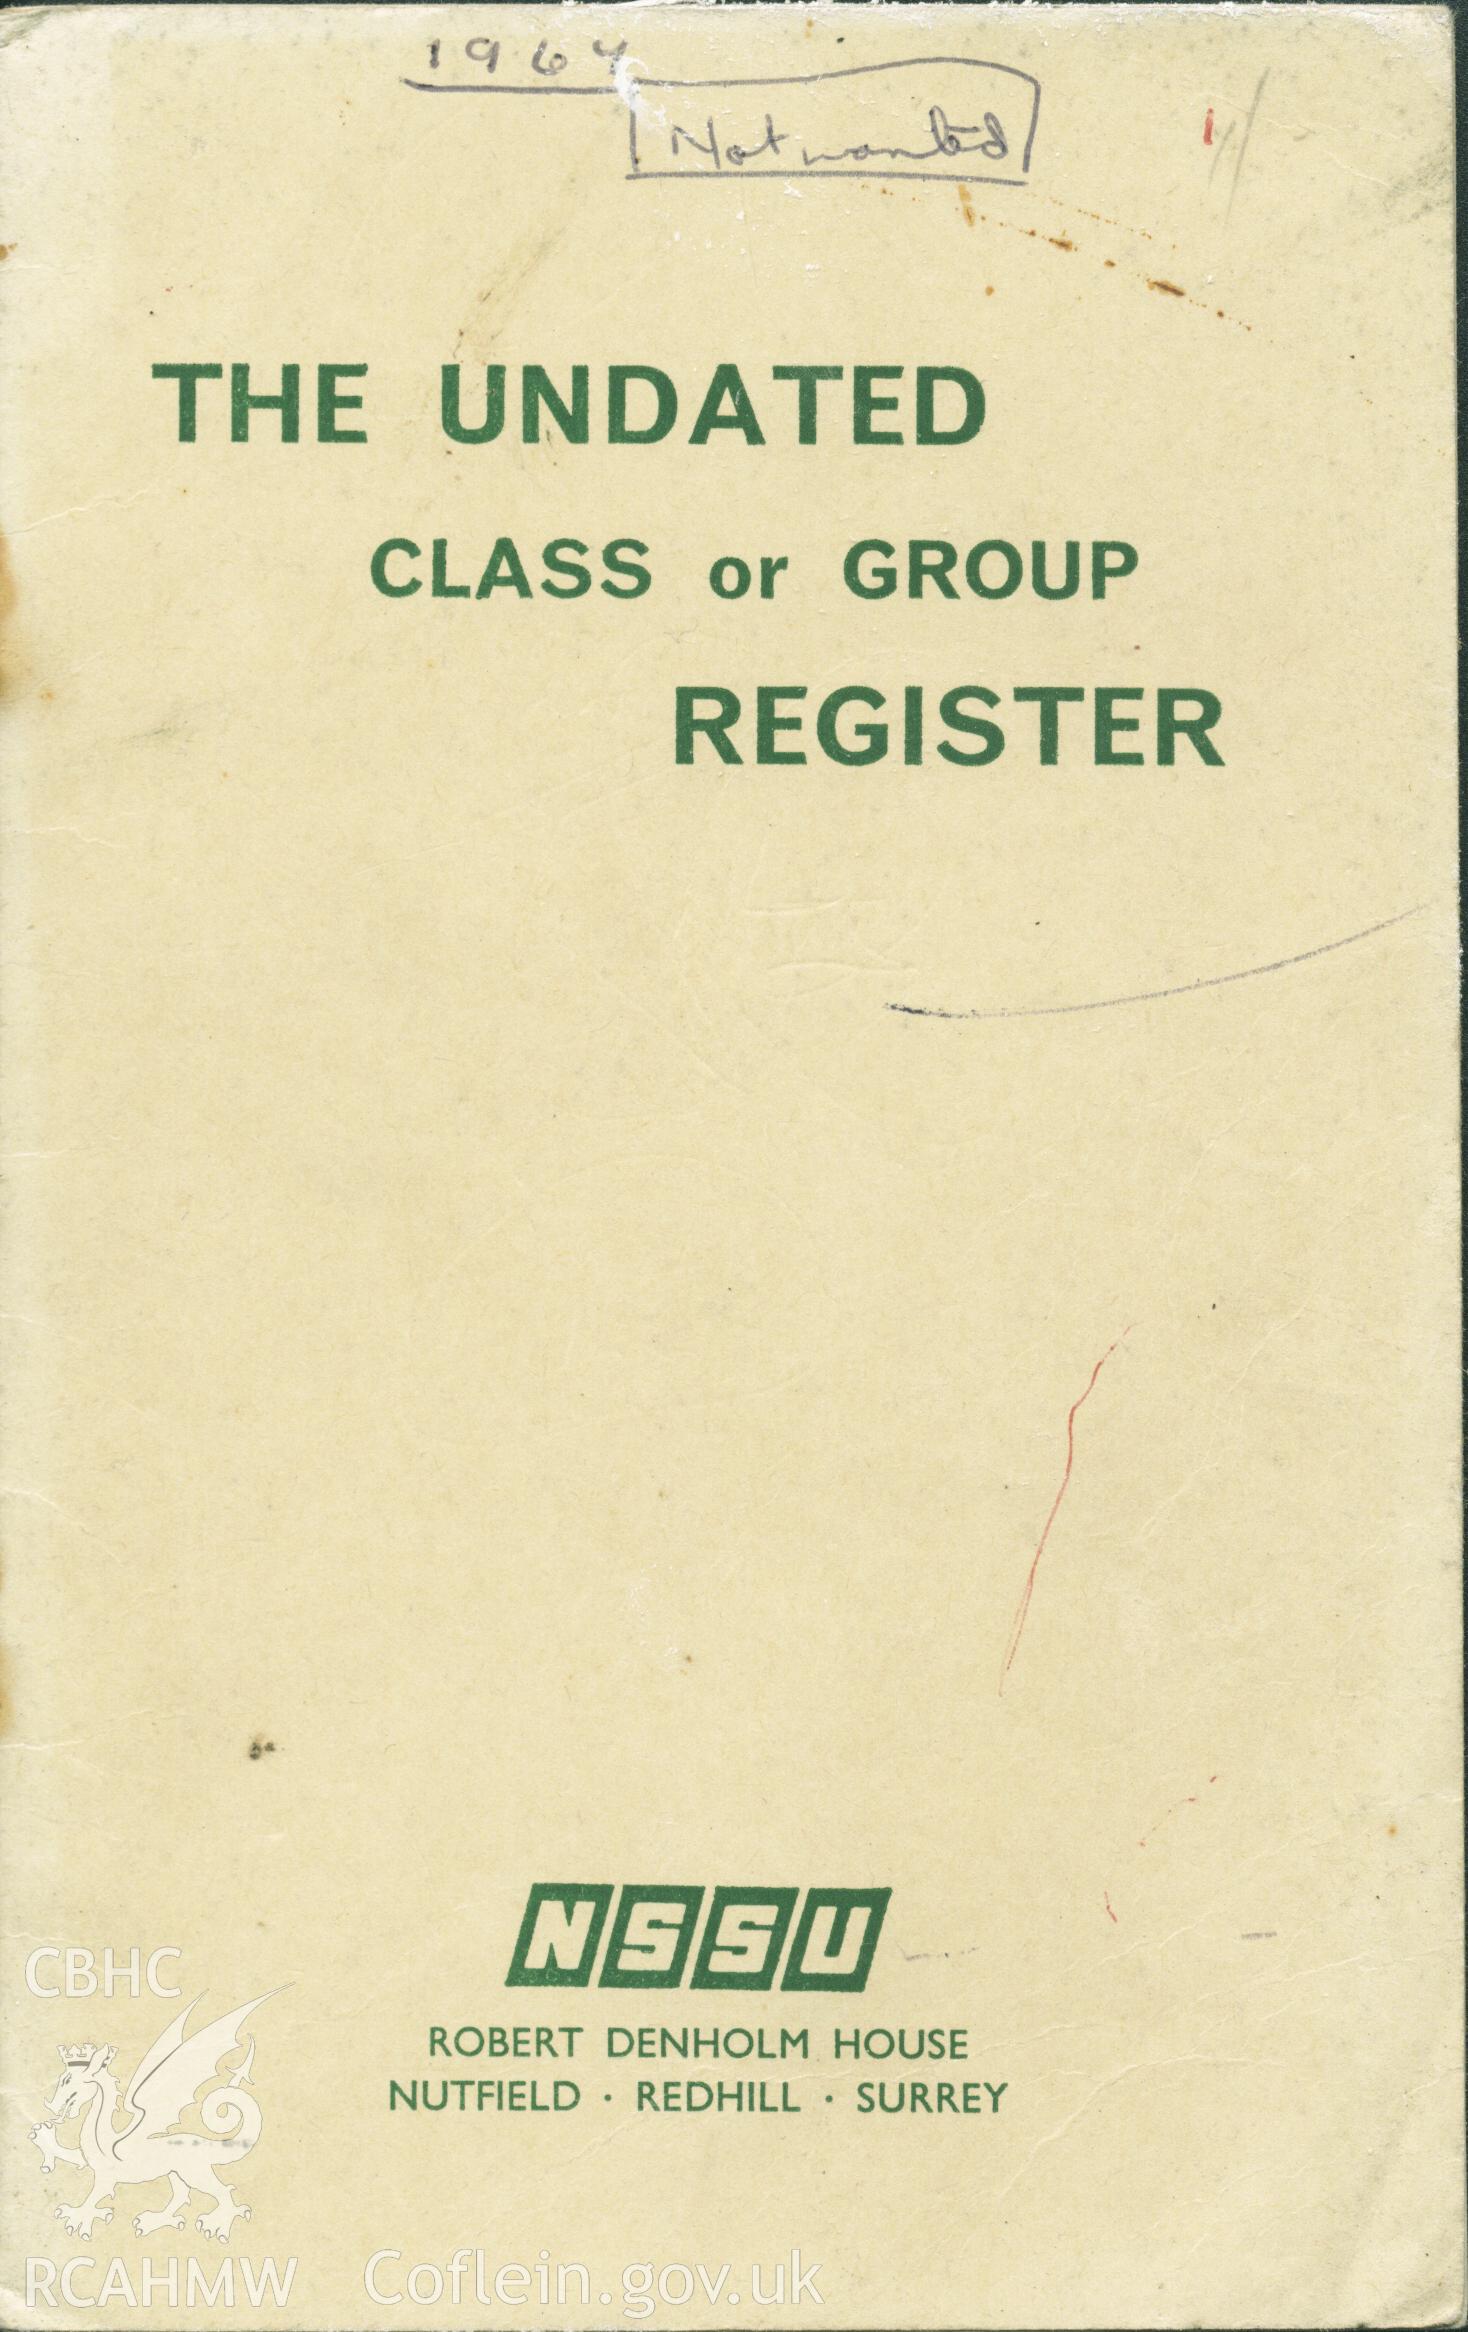 Llwynrhydowen Sunday School Class register 1967. Donated to the RCAHMW during the Digital Dissent Project.